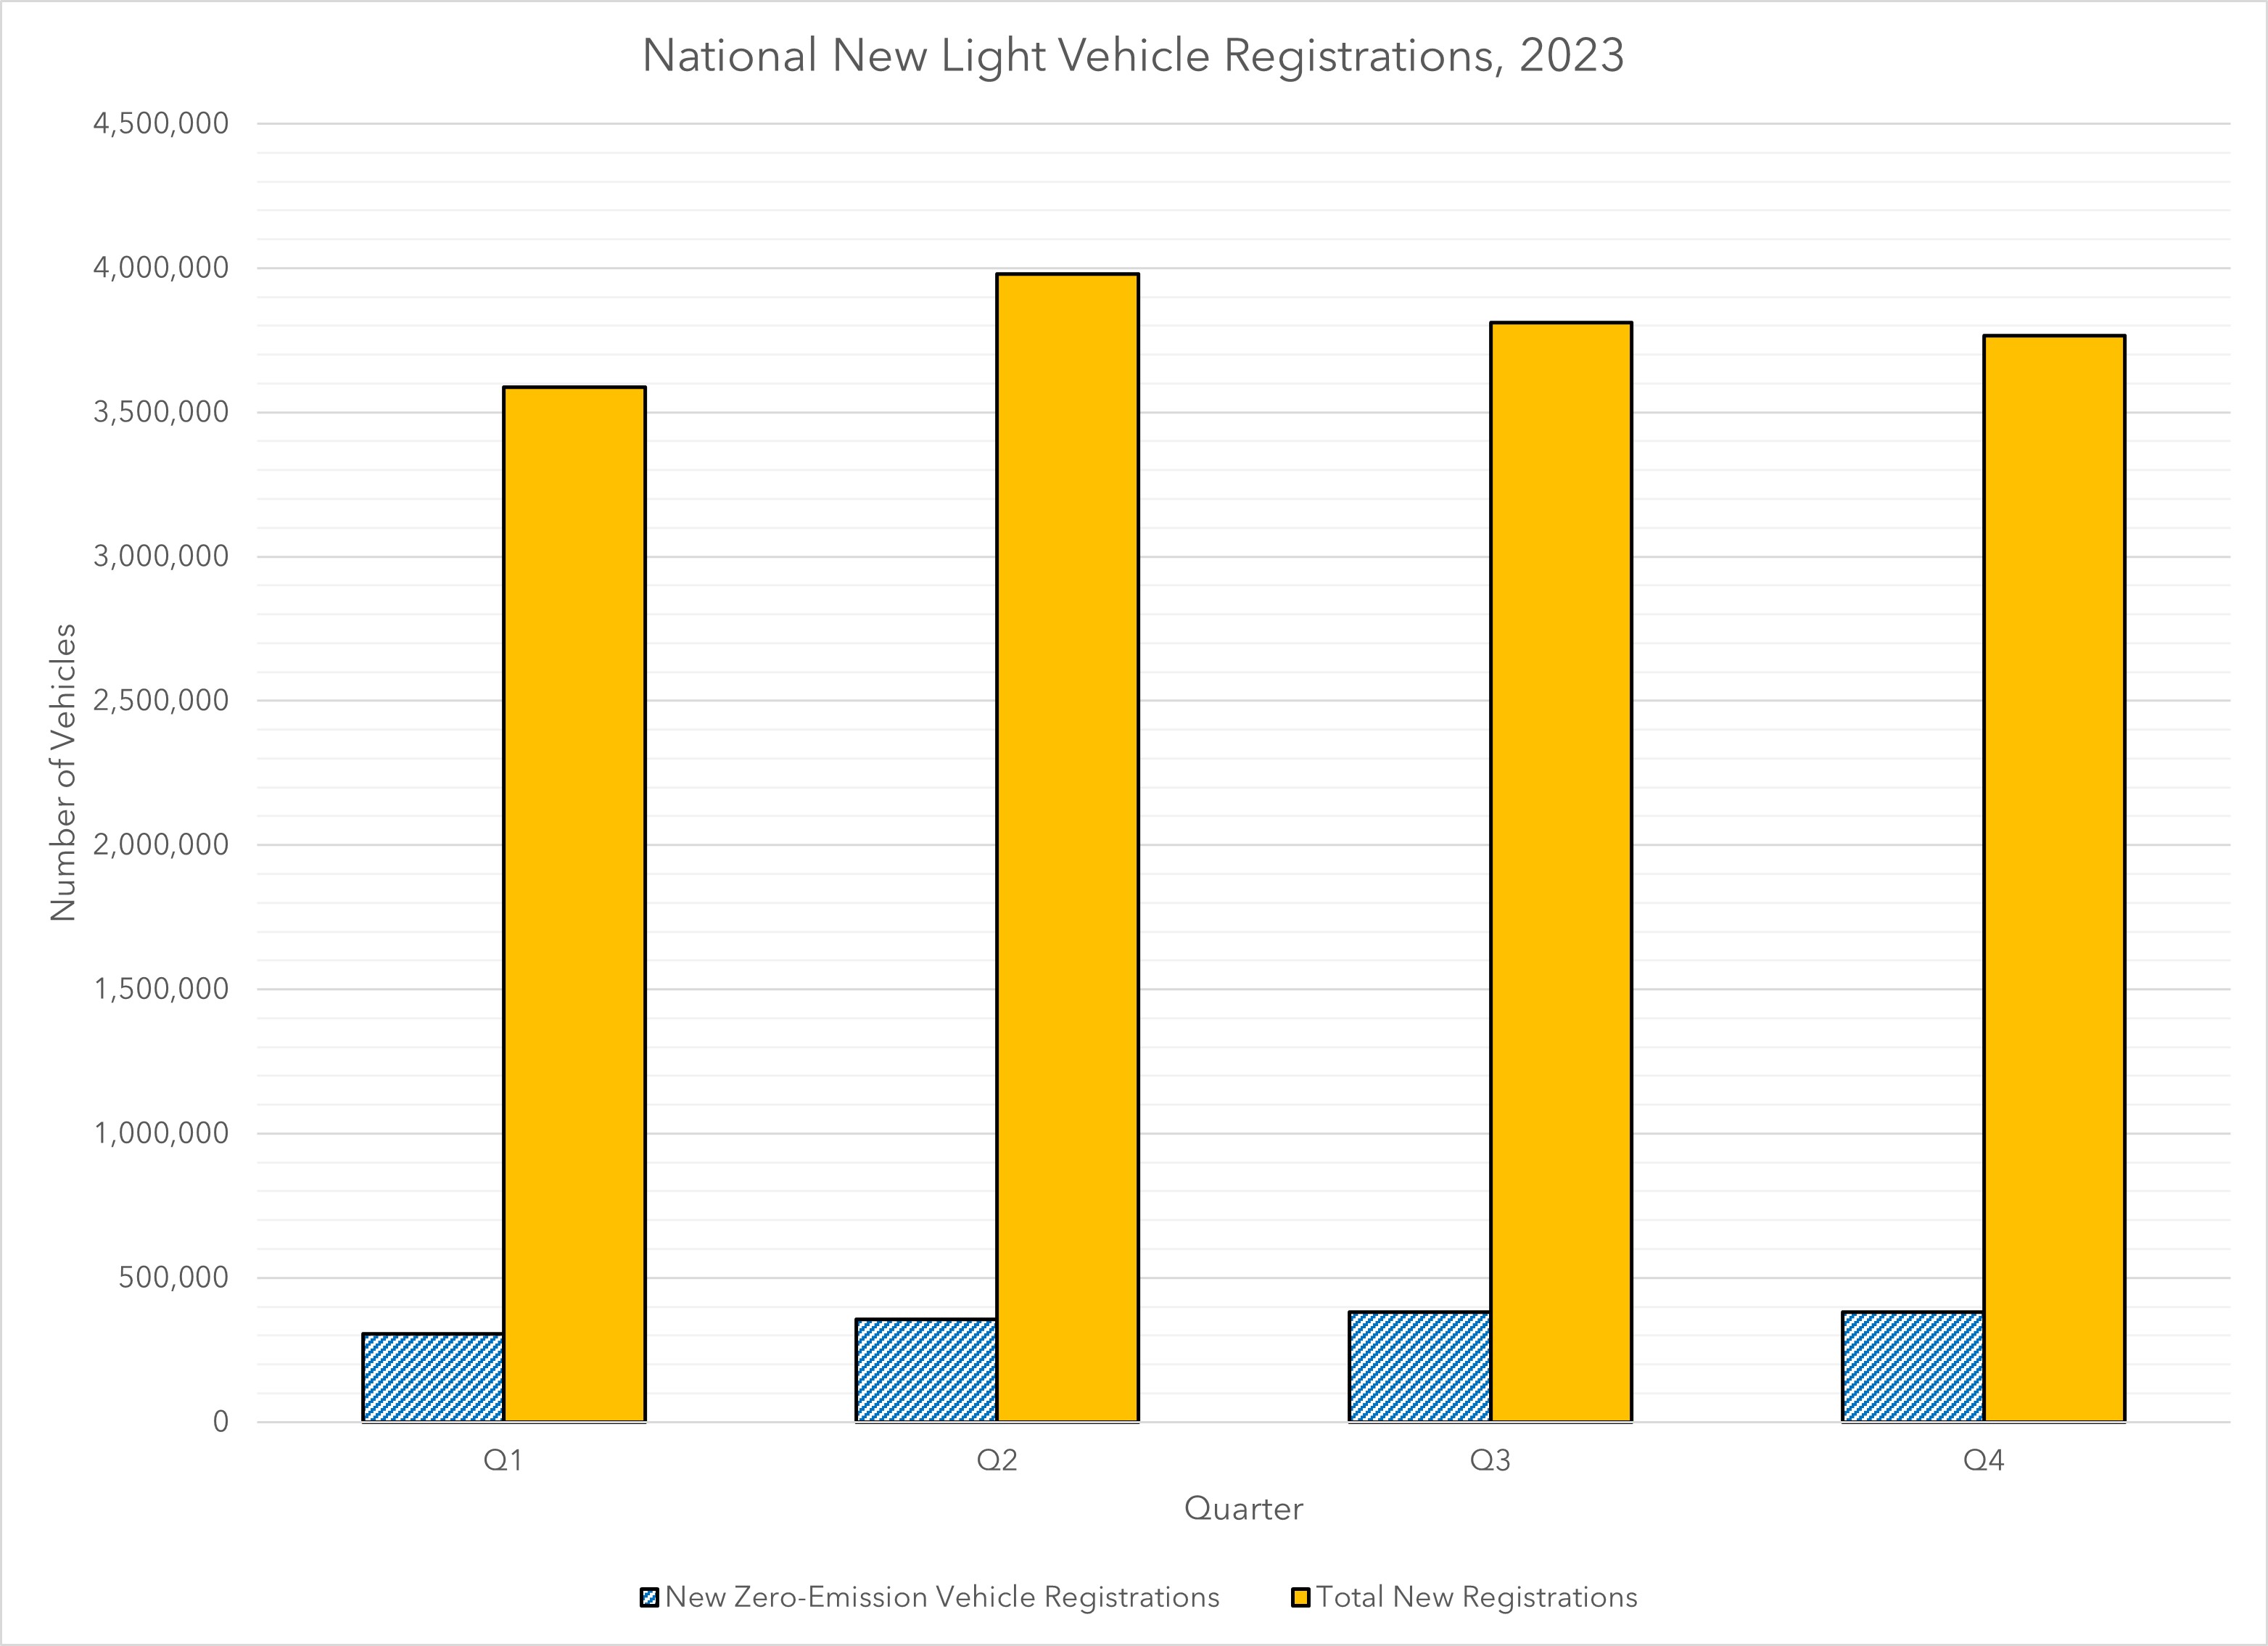 This visual displays national 2023 light-duty new vehicle registrations by quarter. It compares new zero-emission vehicle registrations against total new vehicle registrations.